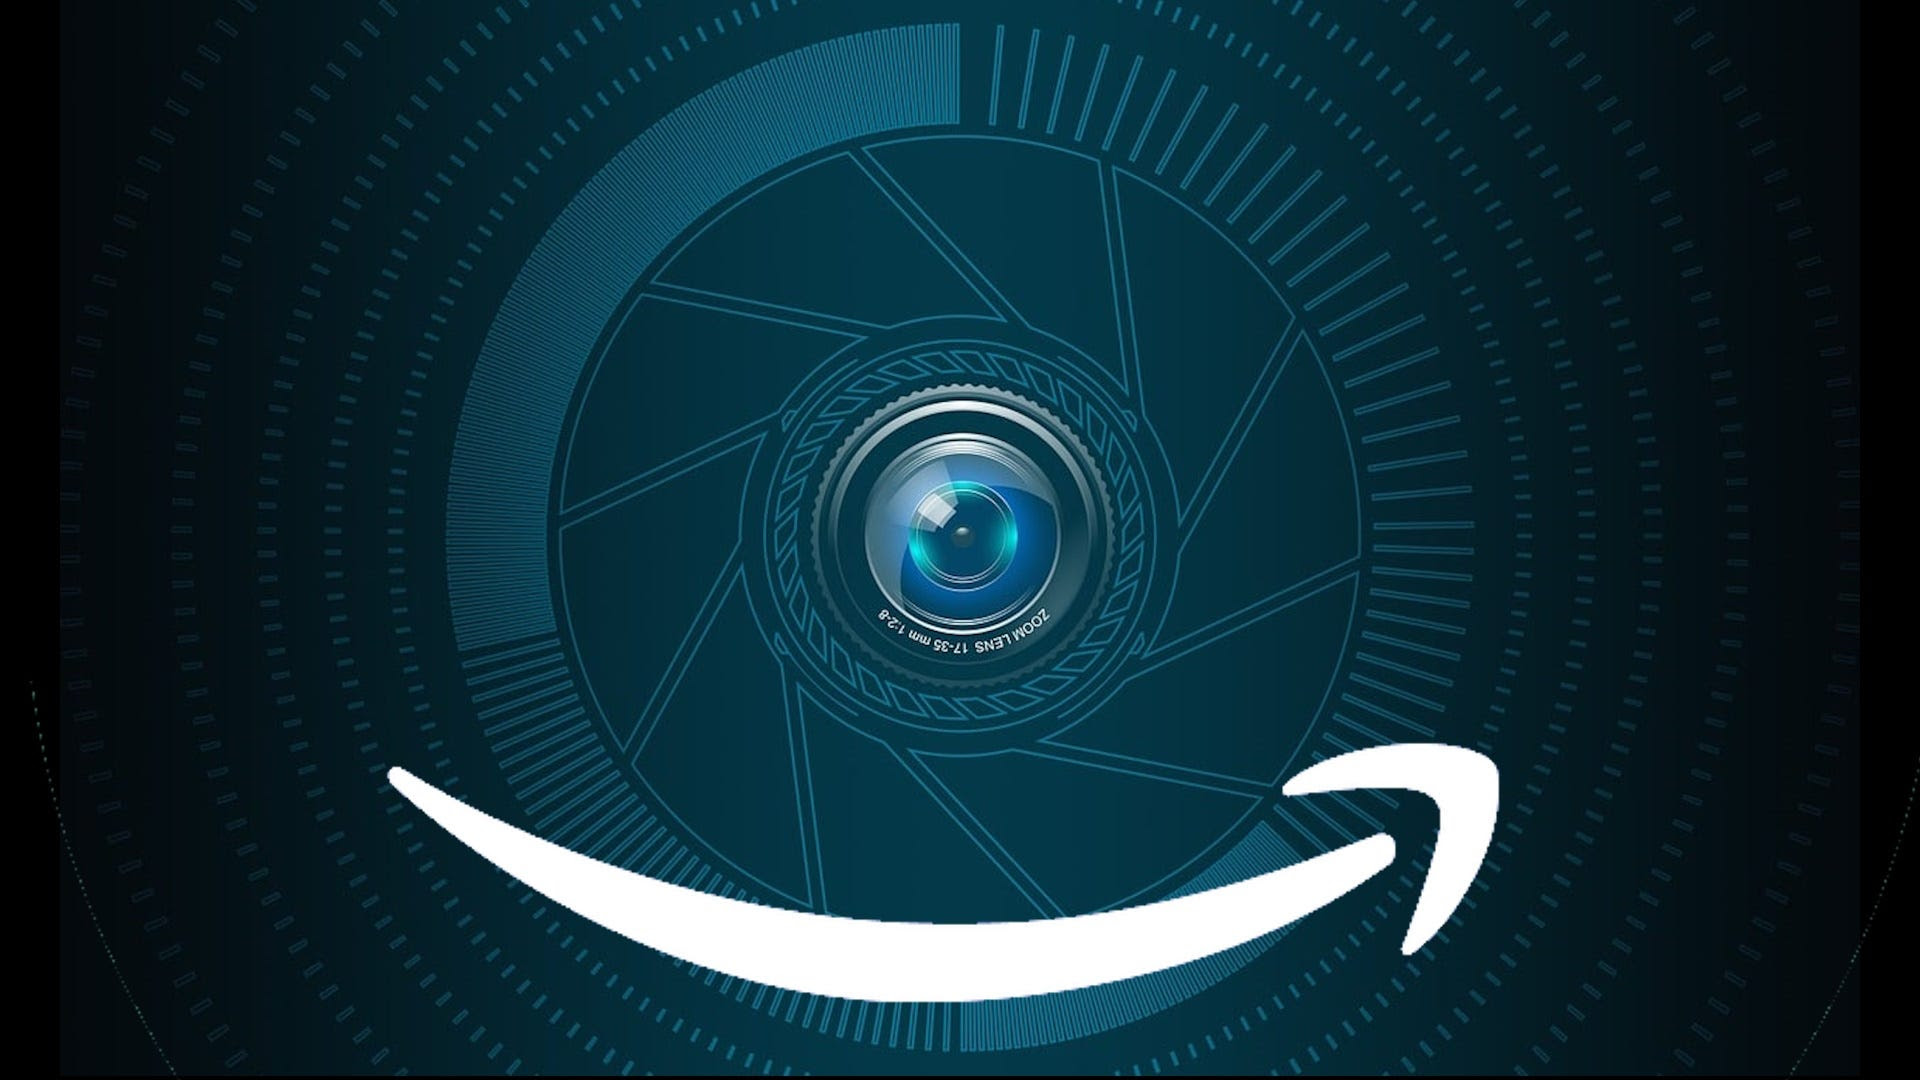 Unveiling the Privacy Perils of Amazon Sidewalk Https%3A%2F%2Fsubstack-post-media.s3.amazonaws.com%2Fpublic%2Fimages%2Ff80713a1-16f9-4c56-8b70-c3dcf4aa5d48_1920x1080